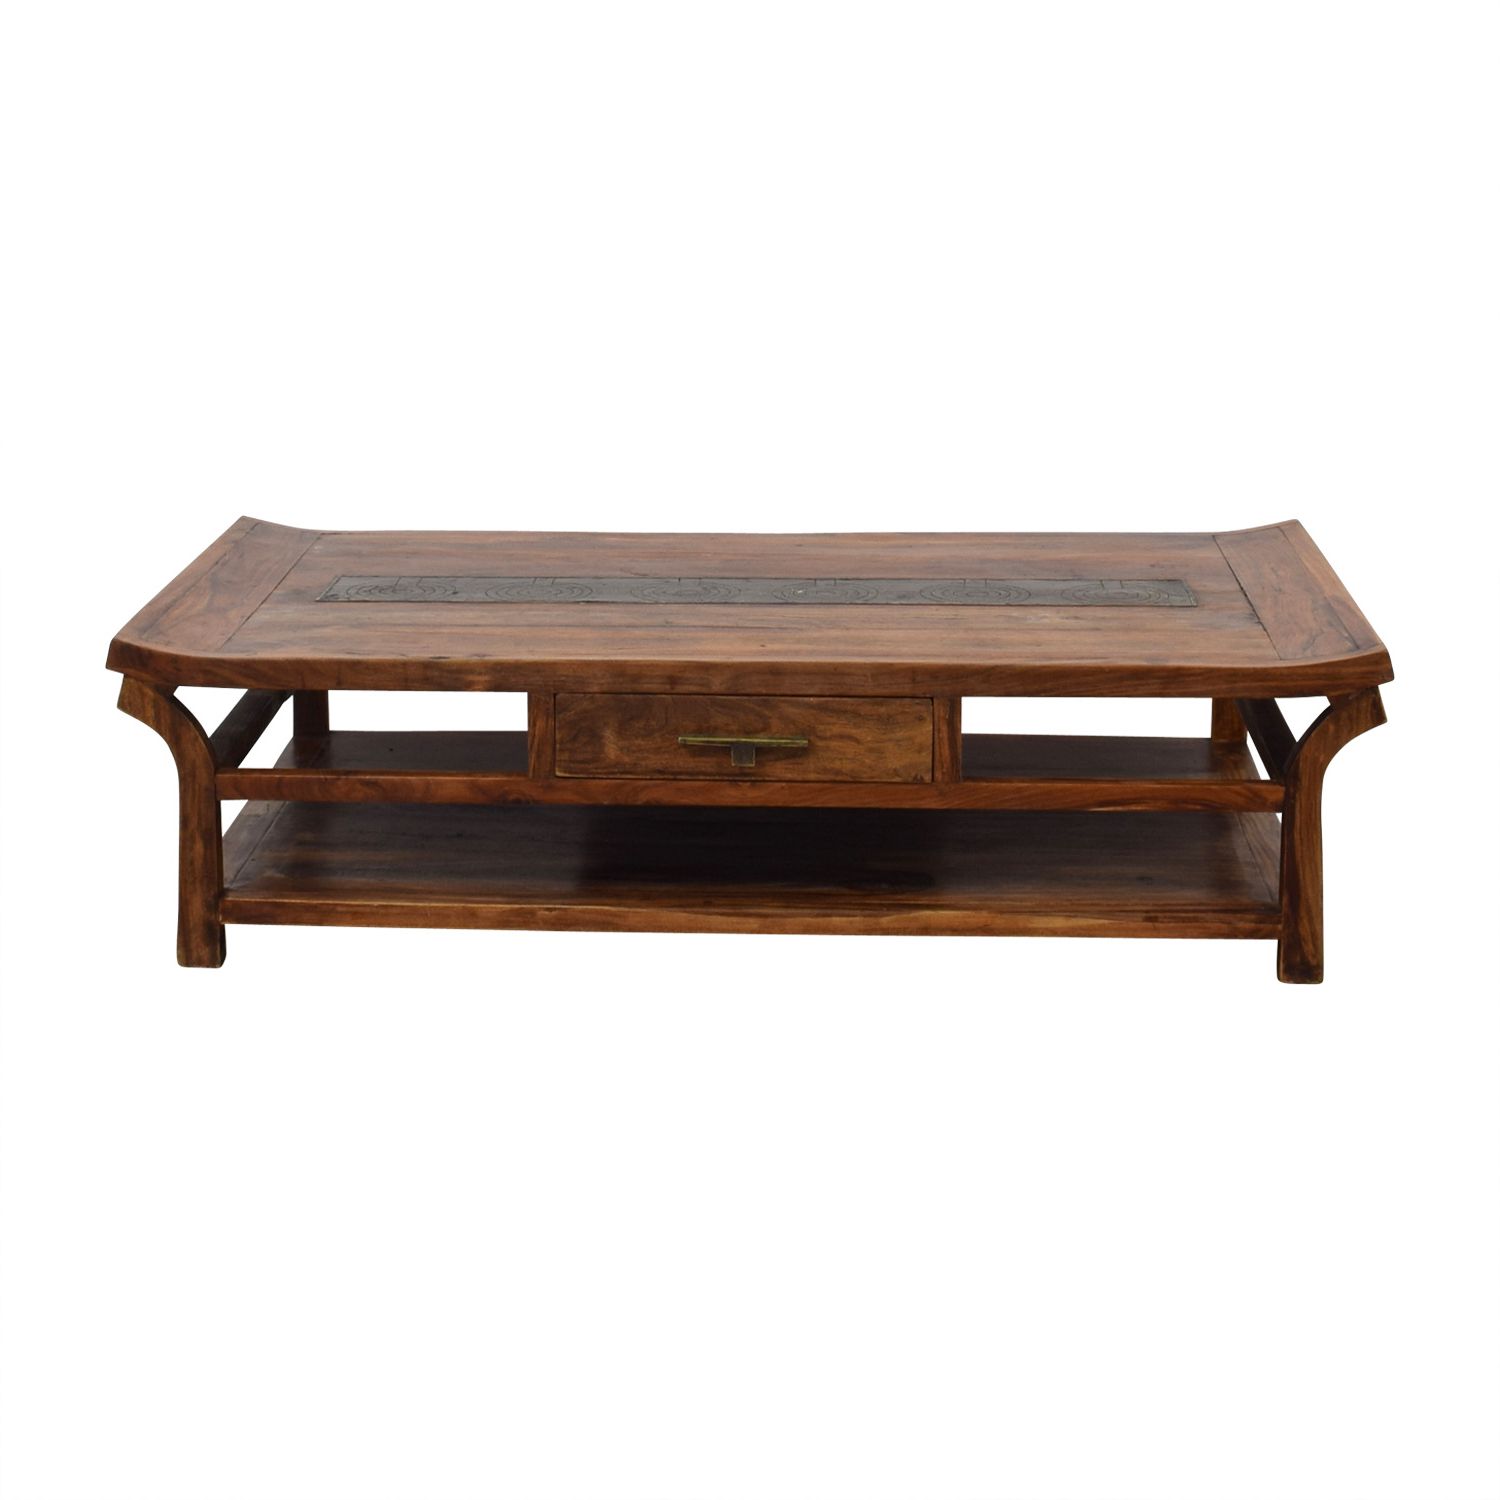 [%90% Off – Natural Wood Coffee Table / Tables Pertaining To Newest Natural Wood Coffee Tables|natural Wood Coffee Tables Throughout Trendy 90% Off – Natural Wood Coffee Table / Tables|preferred Natural Wood Coffee Tables Pertaining To 90% Off – Natural Wood Coffee Table / Tables|widely Used 90% Off – Natural Wood Coffee Table / Tables Intended For Natural Wood Coffee Tables%] (View 4 of 10)